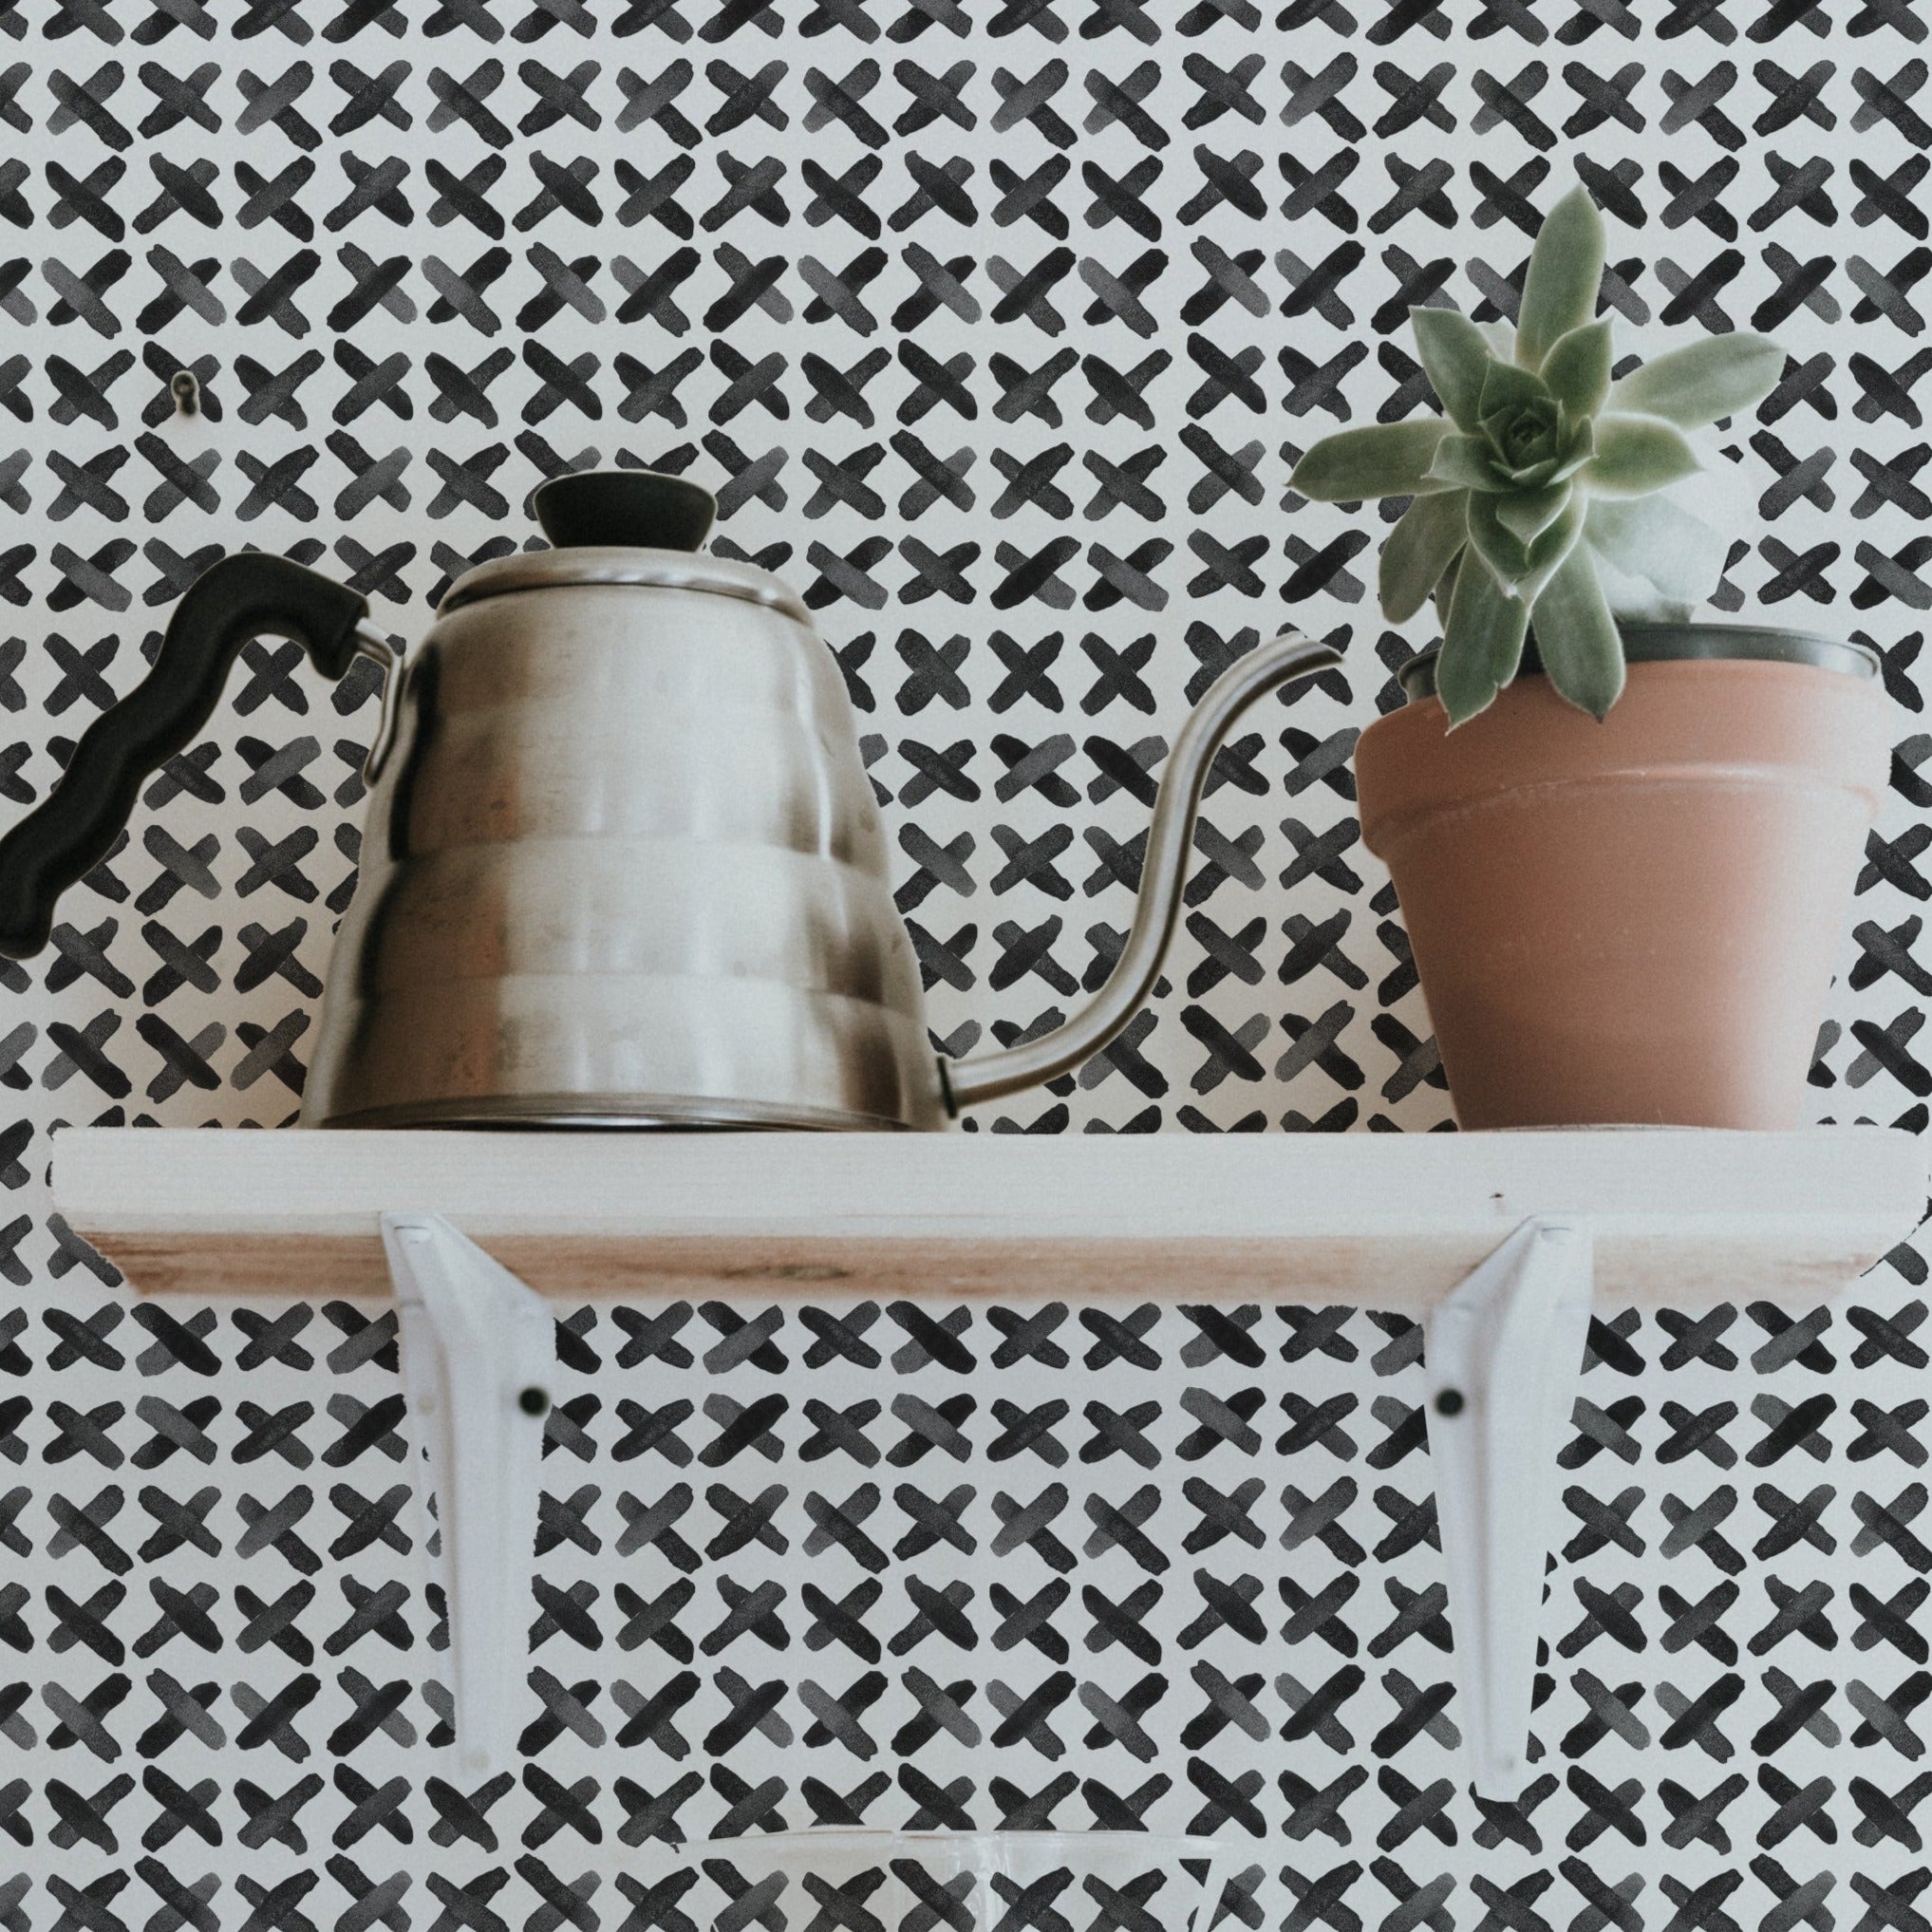 Decorative shelf against X Infinity Boho Wallpaper with black and white geometric pattern, displaying a vintage kettle and a potted succulent for a stylish home accent.